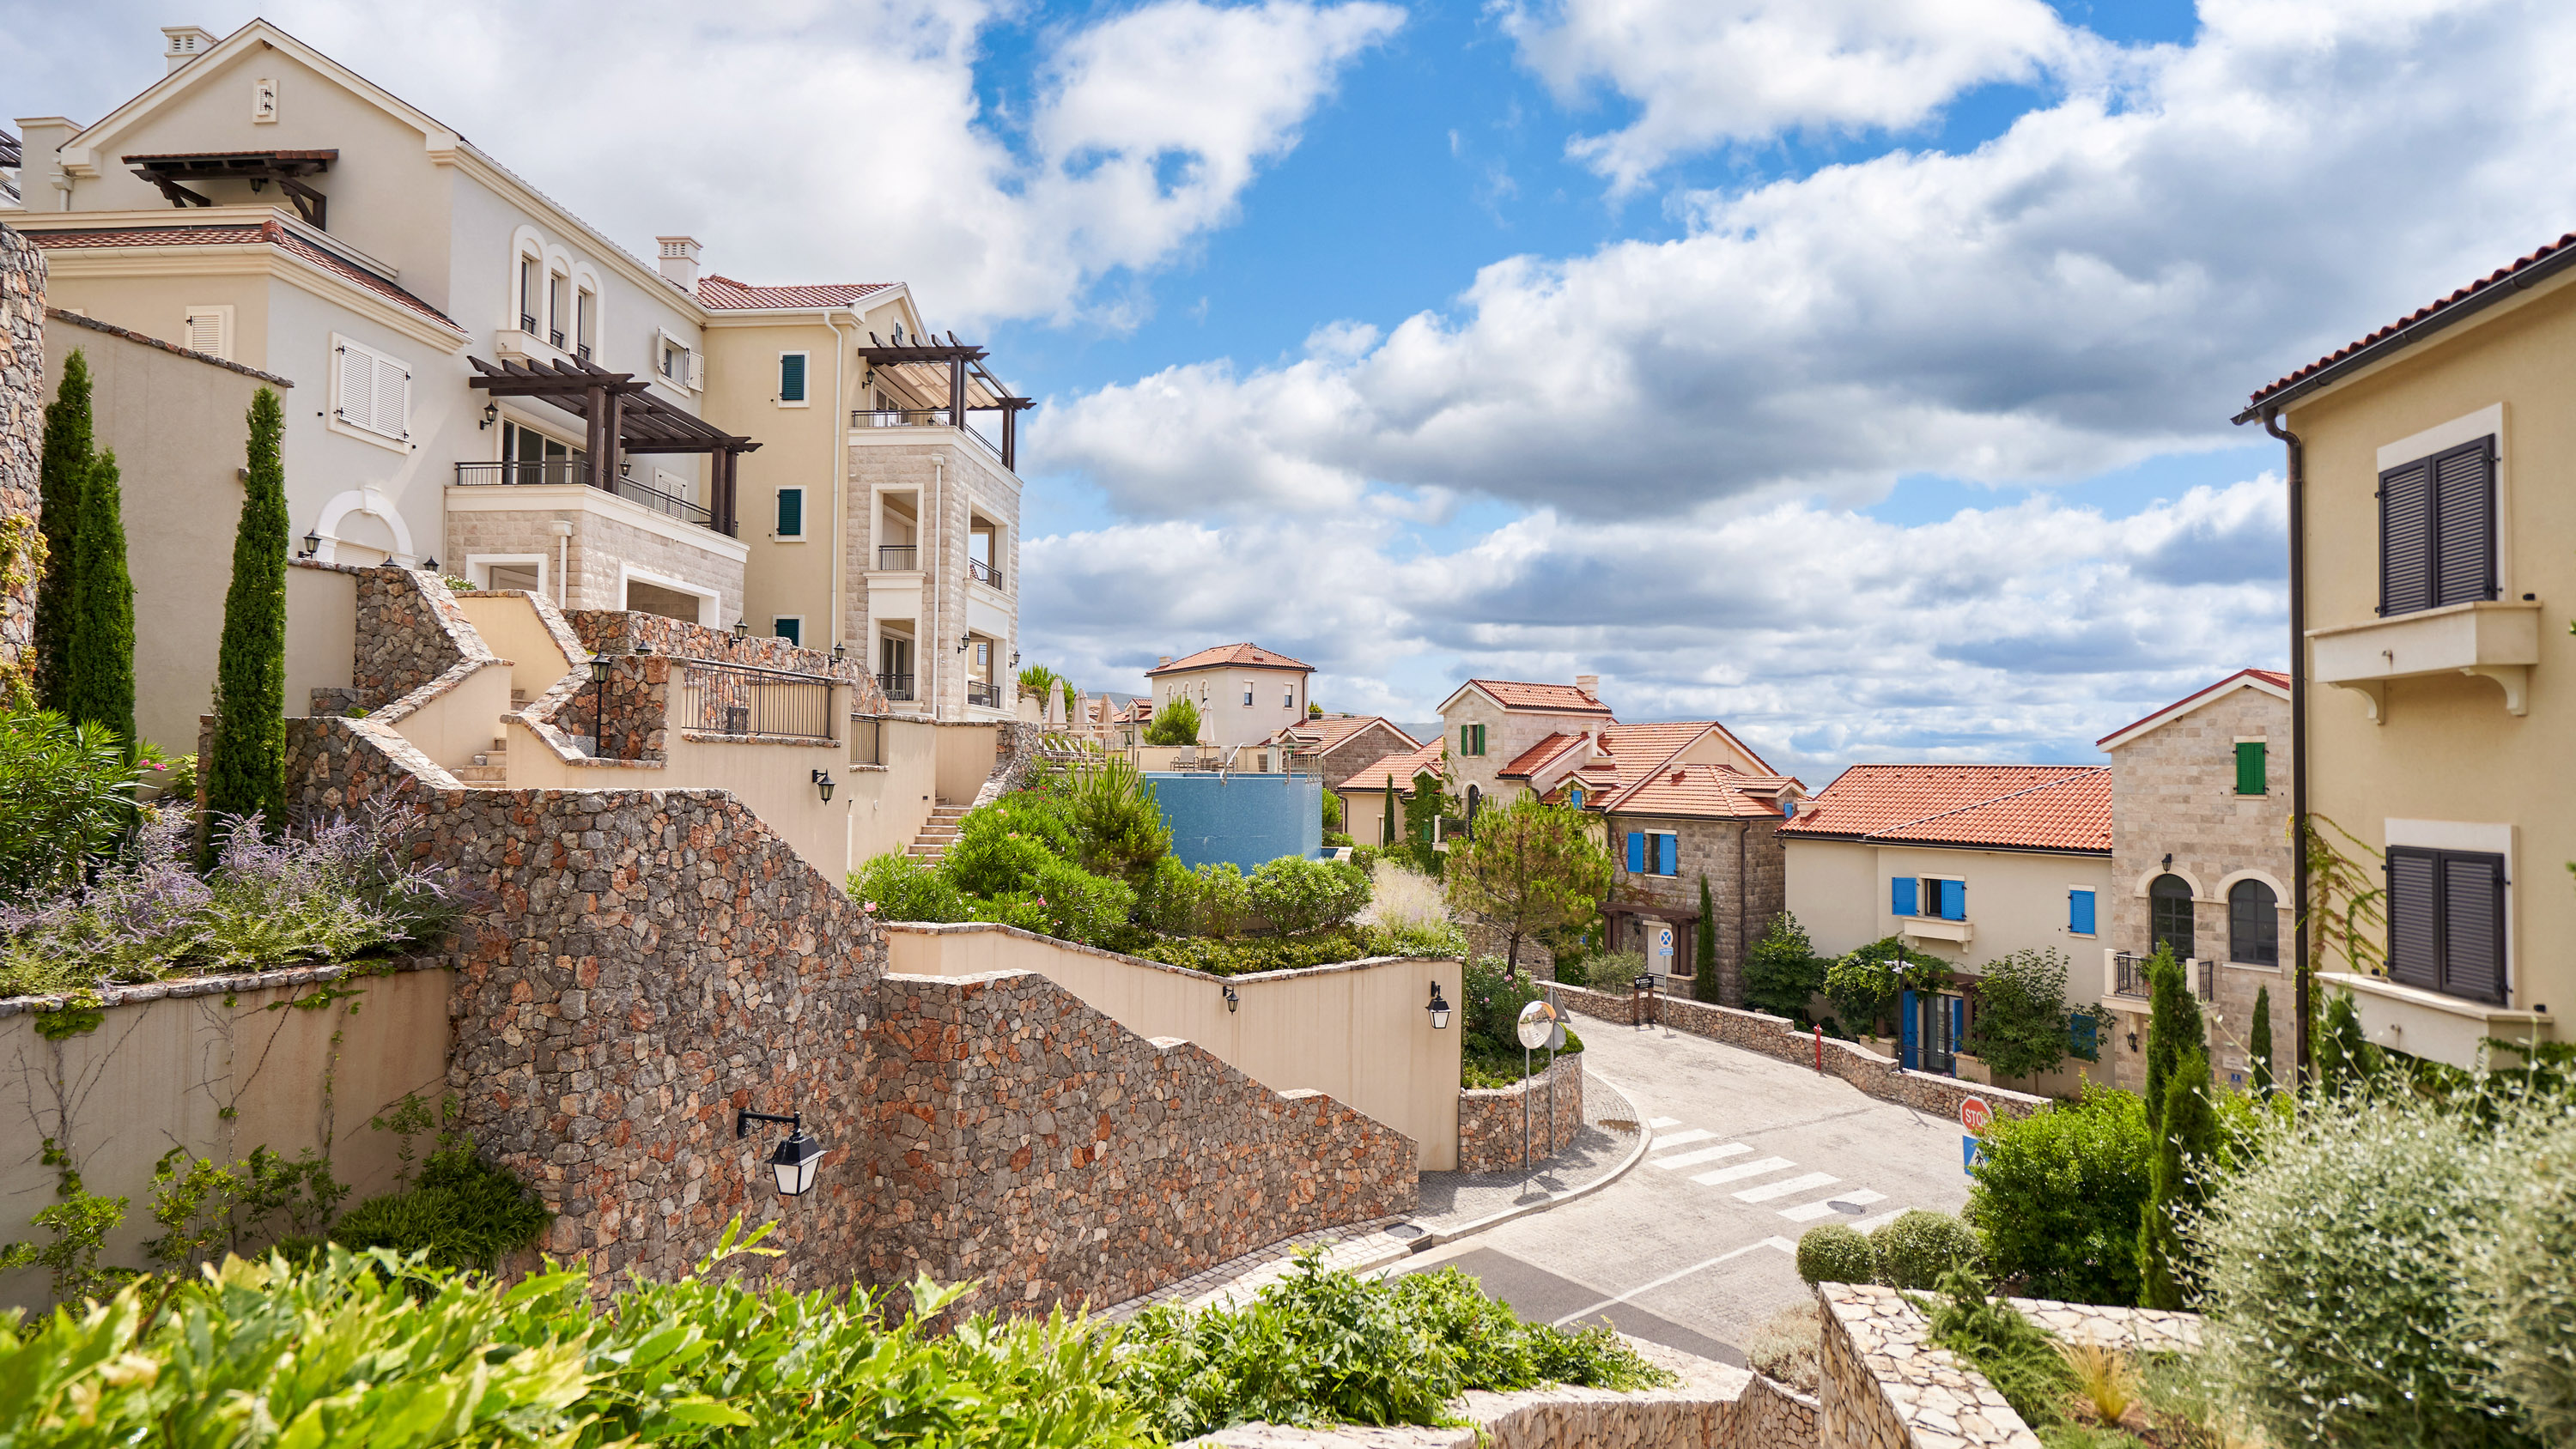 view of elevated buildings with winding stone stairways in Lustica Bay